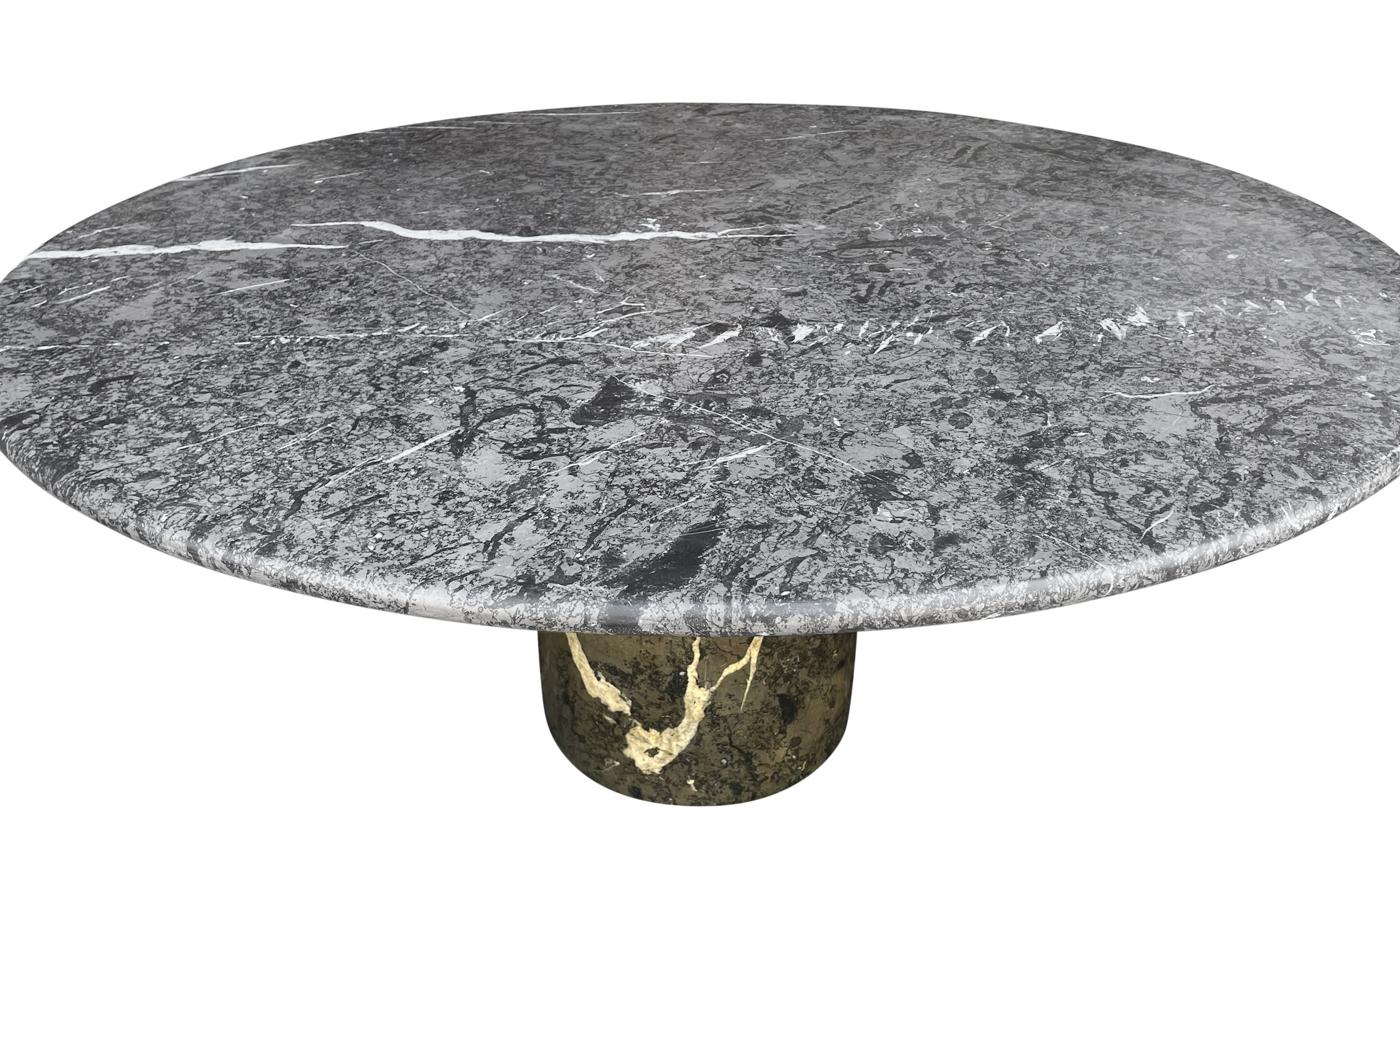 A stunning and substantial round dining table in two color marble combination. It features a thick circular base with large almost 60 inch top. Well take care of and ready for use.